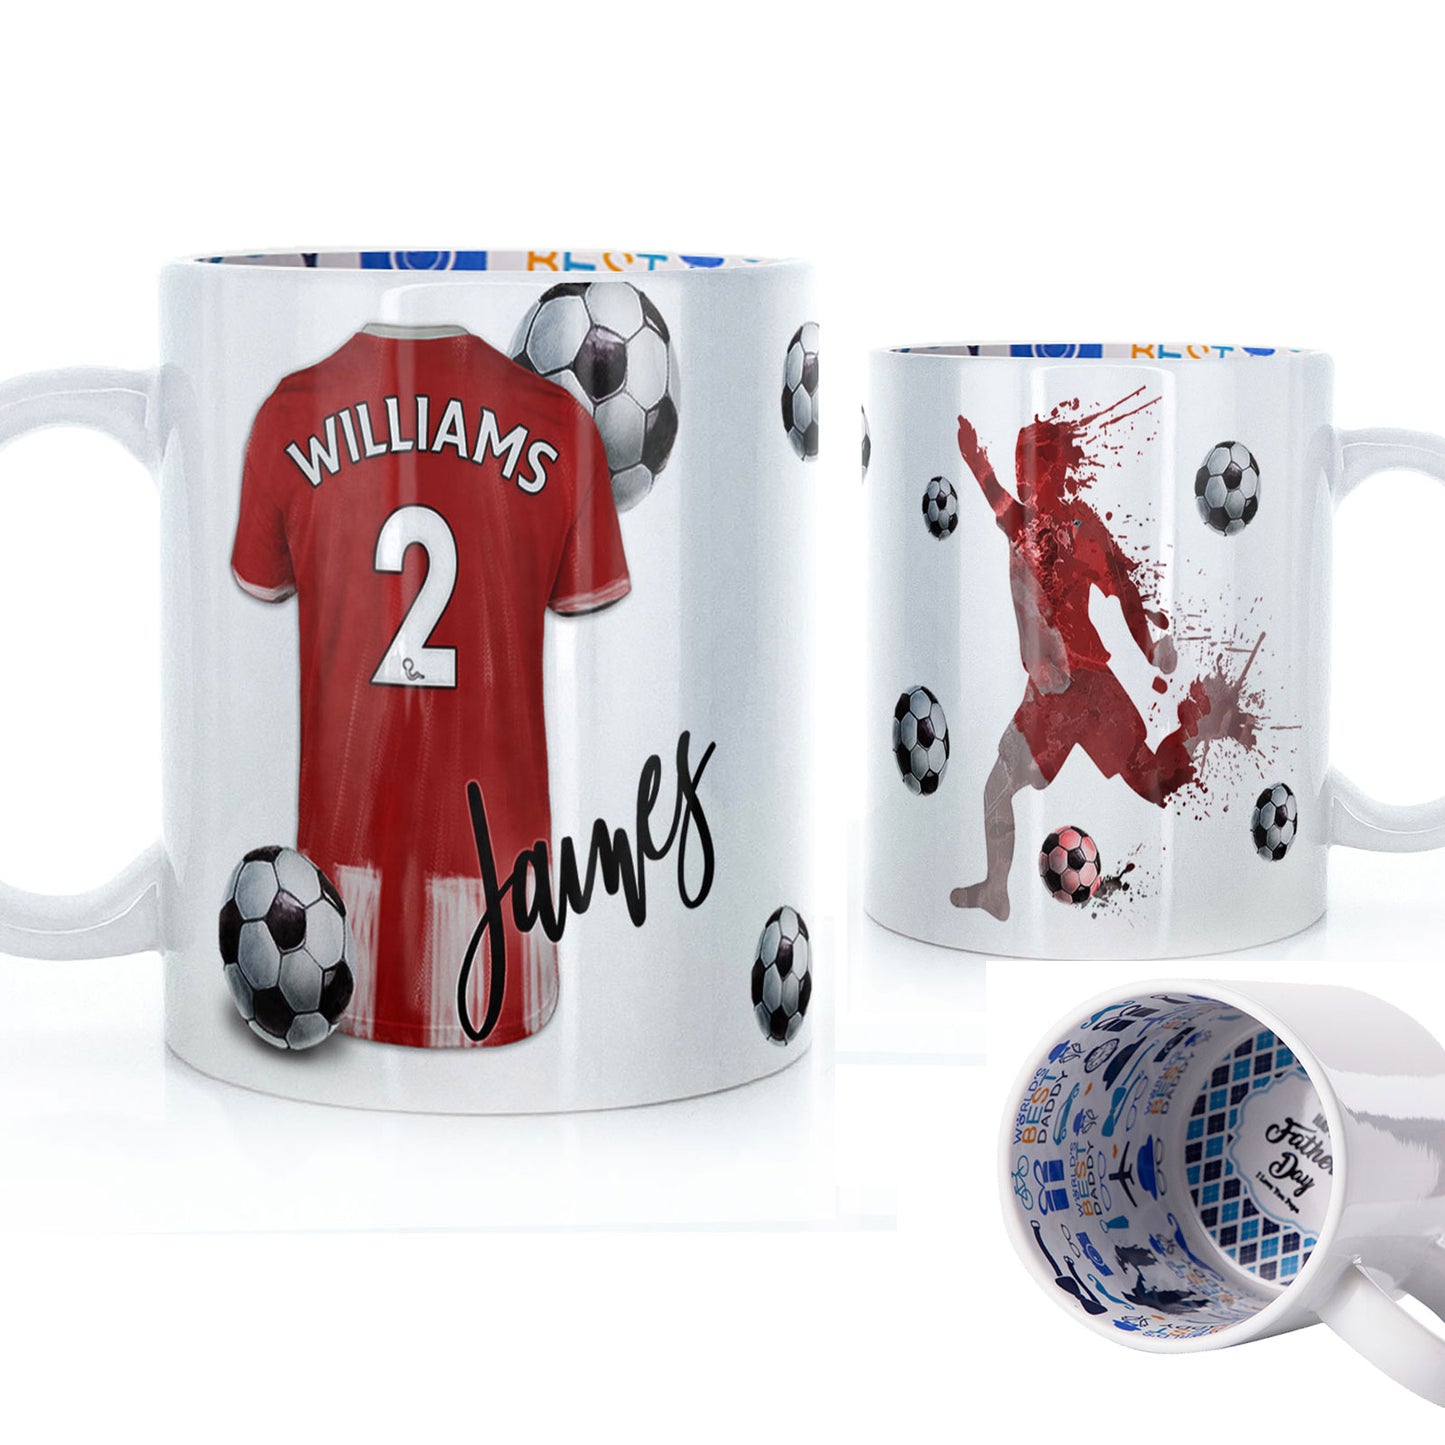 Personalised Mug with Stylish Text and Red & White Stripes Shirt with Name & Number